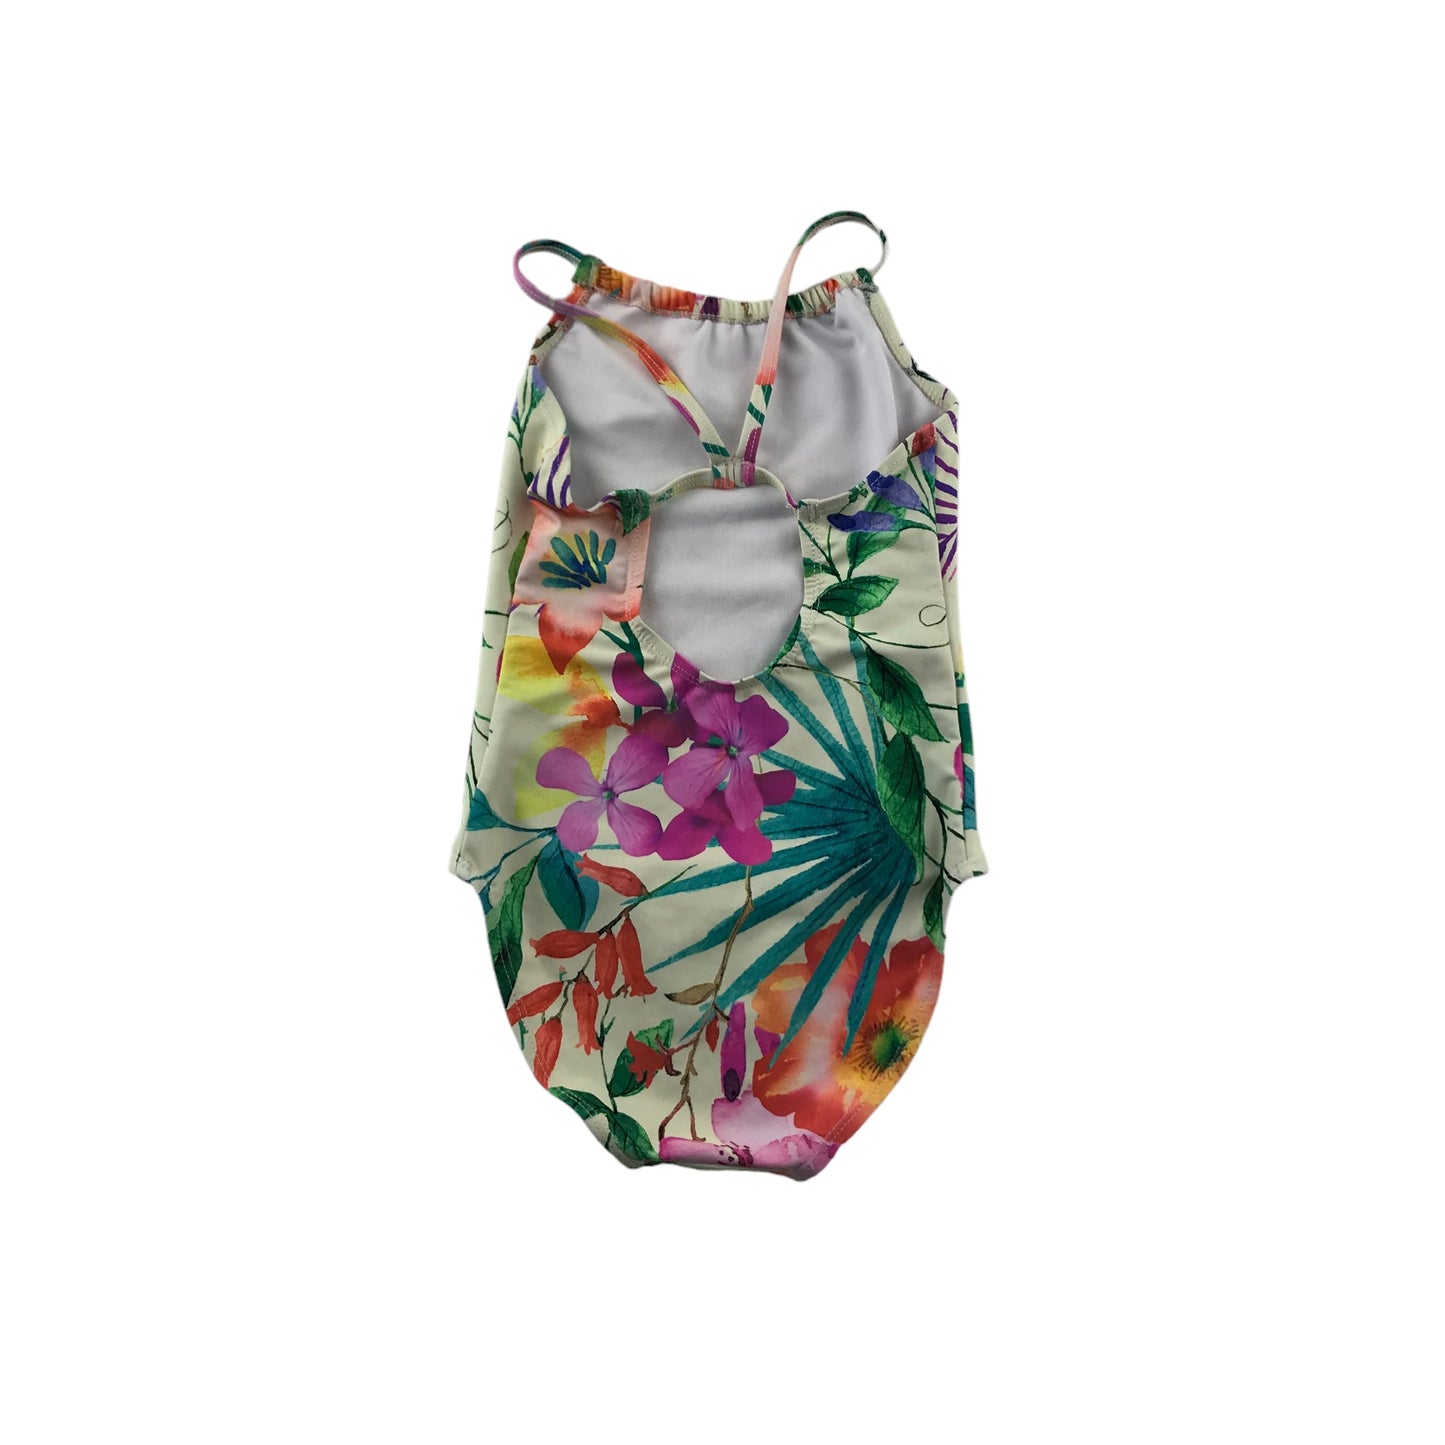 Next Swimsuit Age 5 Green Pink White Floral One Piece Cossie